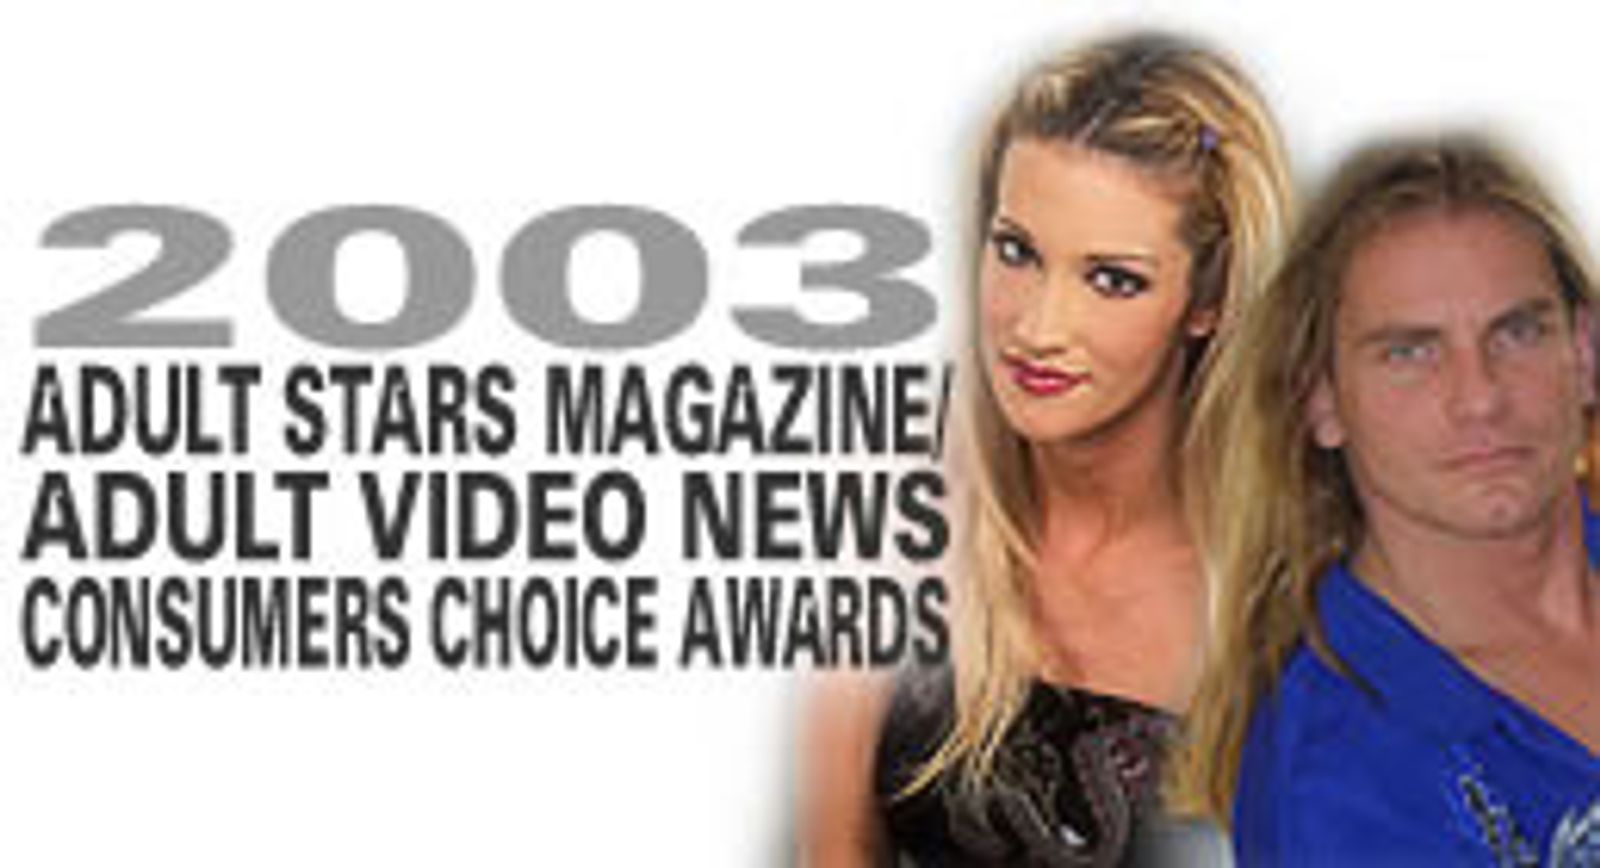 Jessica Drake and Evan Stone Tapped to Host 2003 Consumer Choice Awards